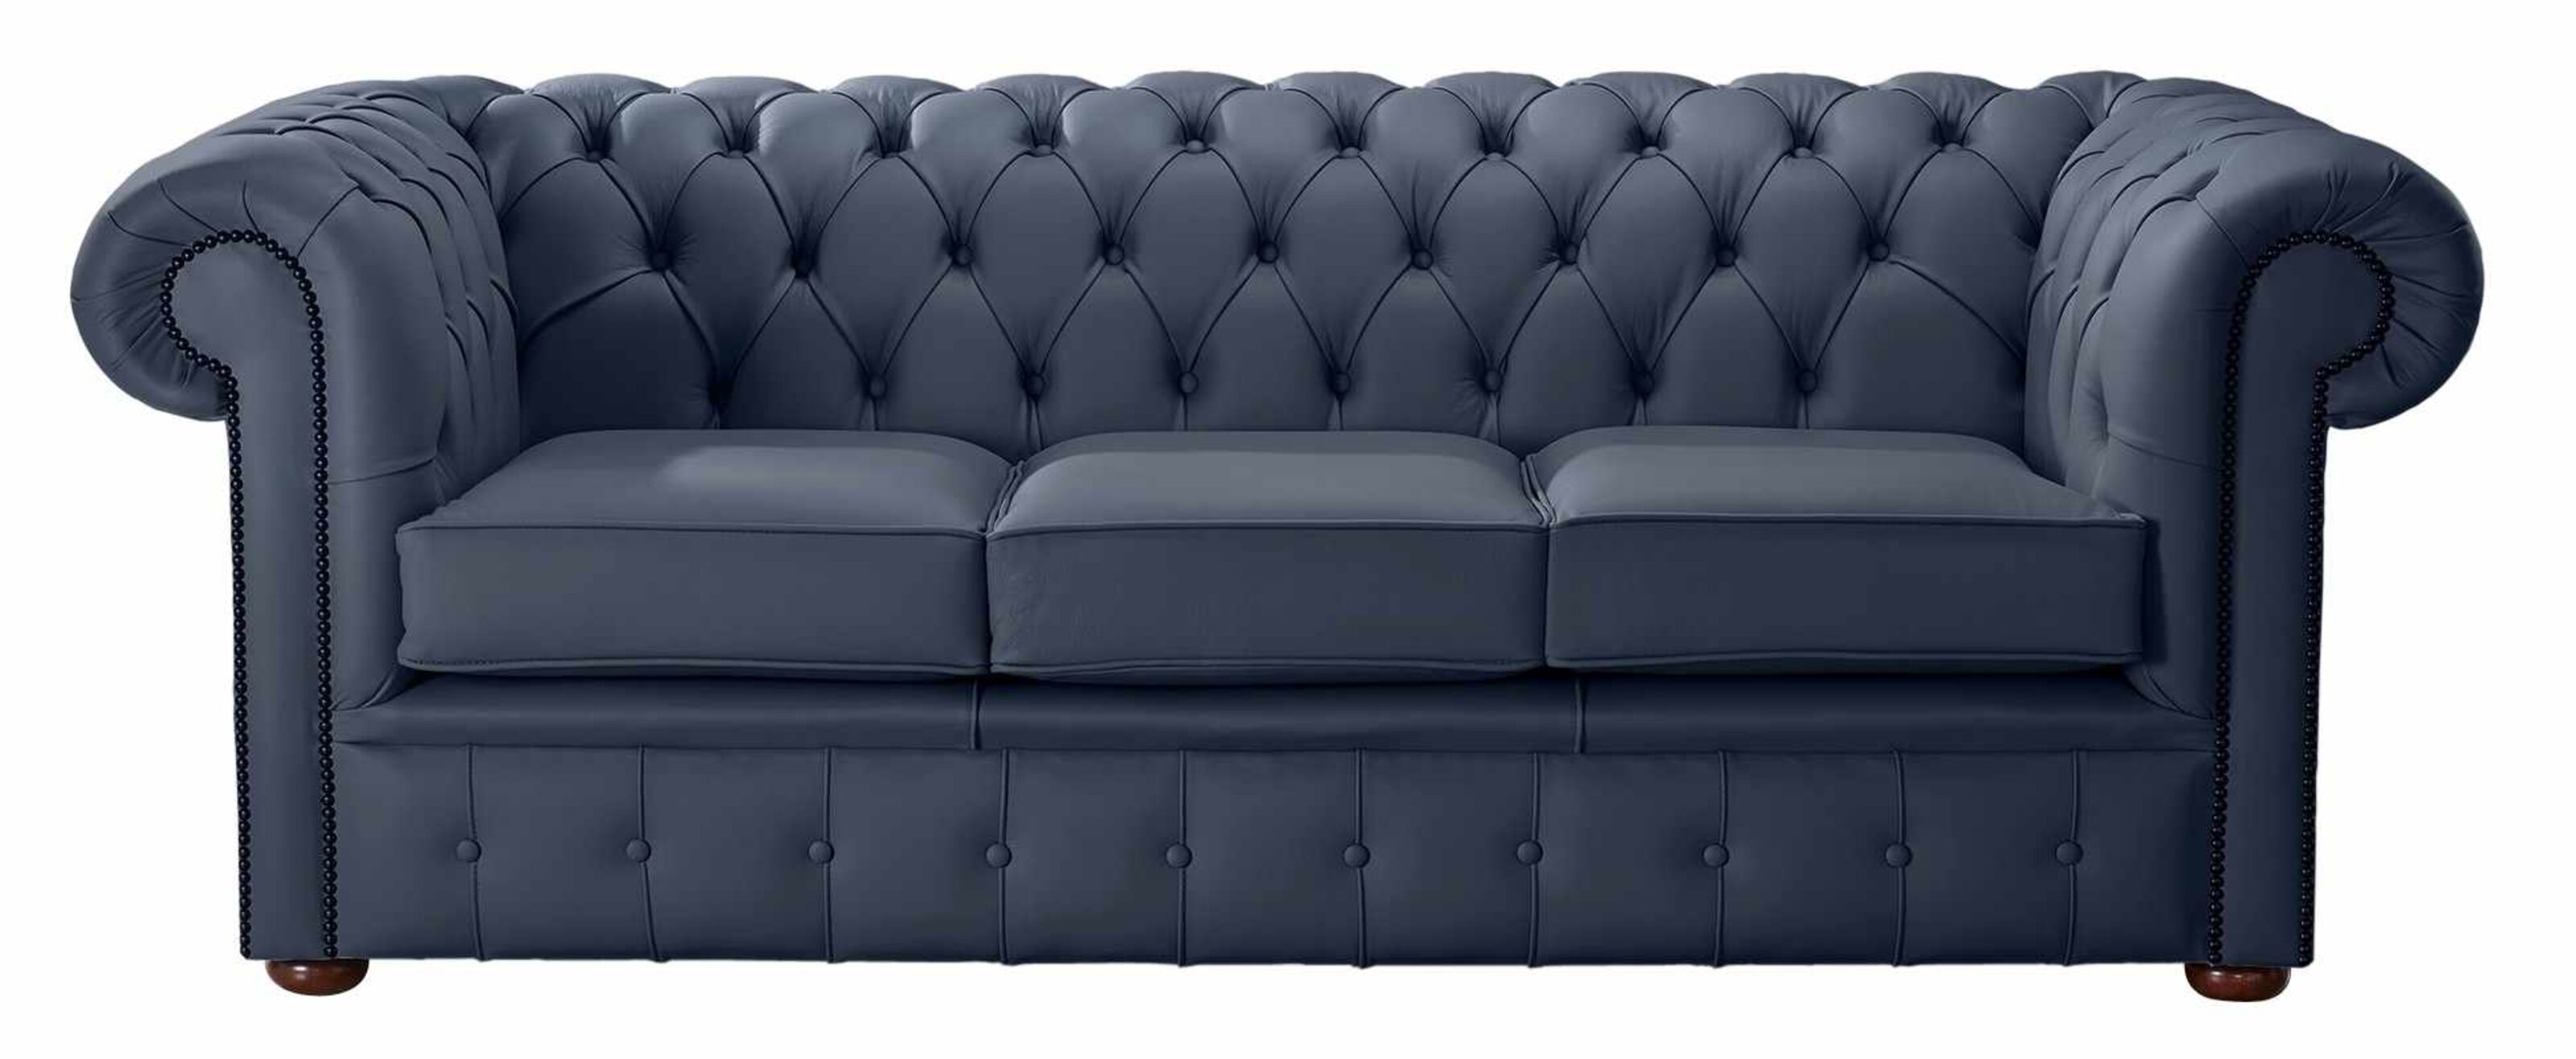 Crafting Your Dream Chesterfield Sofa: The Art of Uniqueness  %Post Title